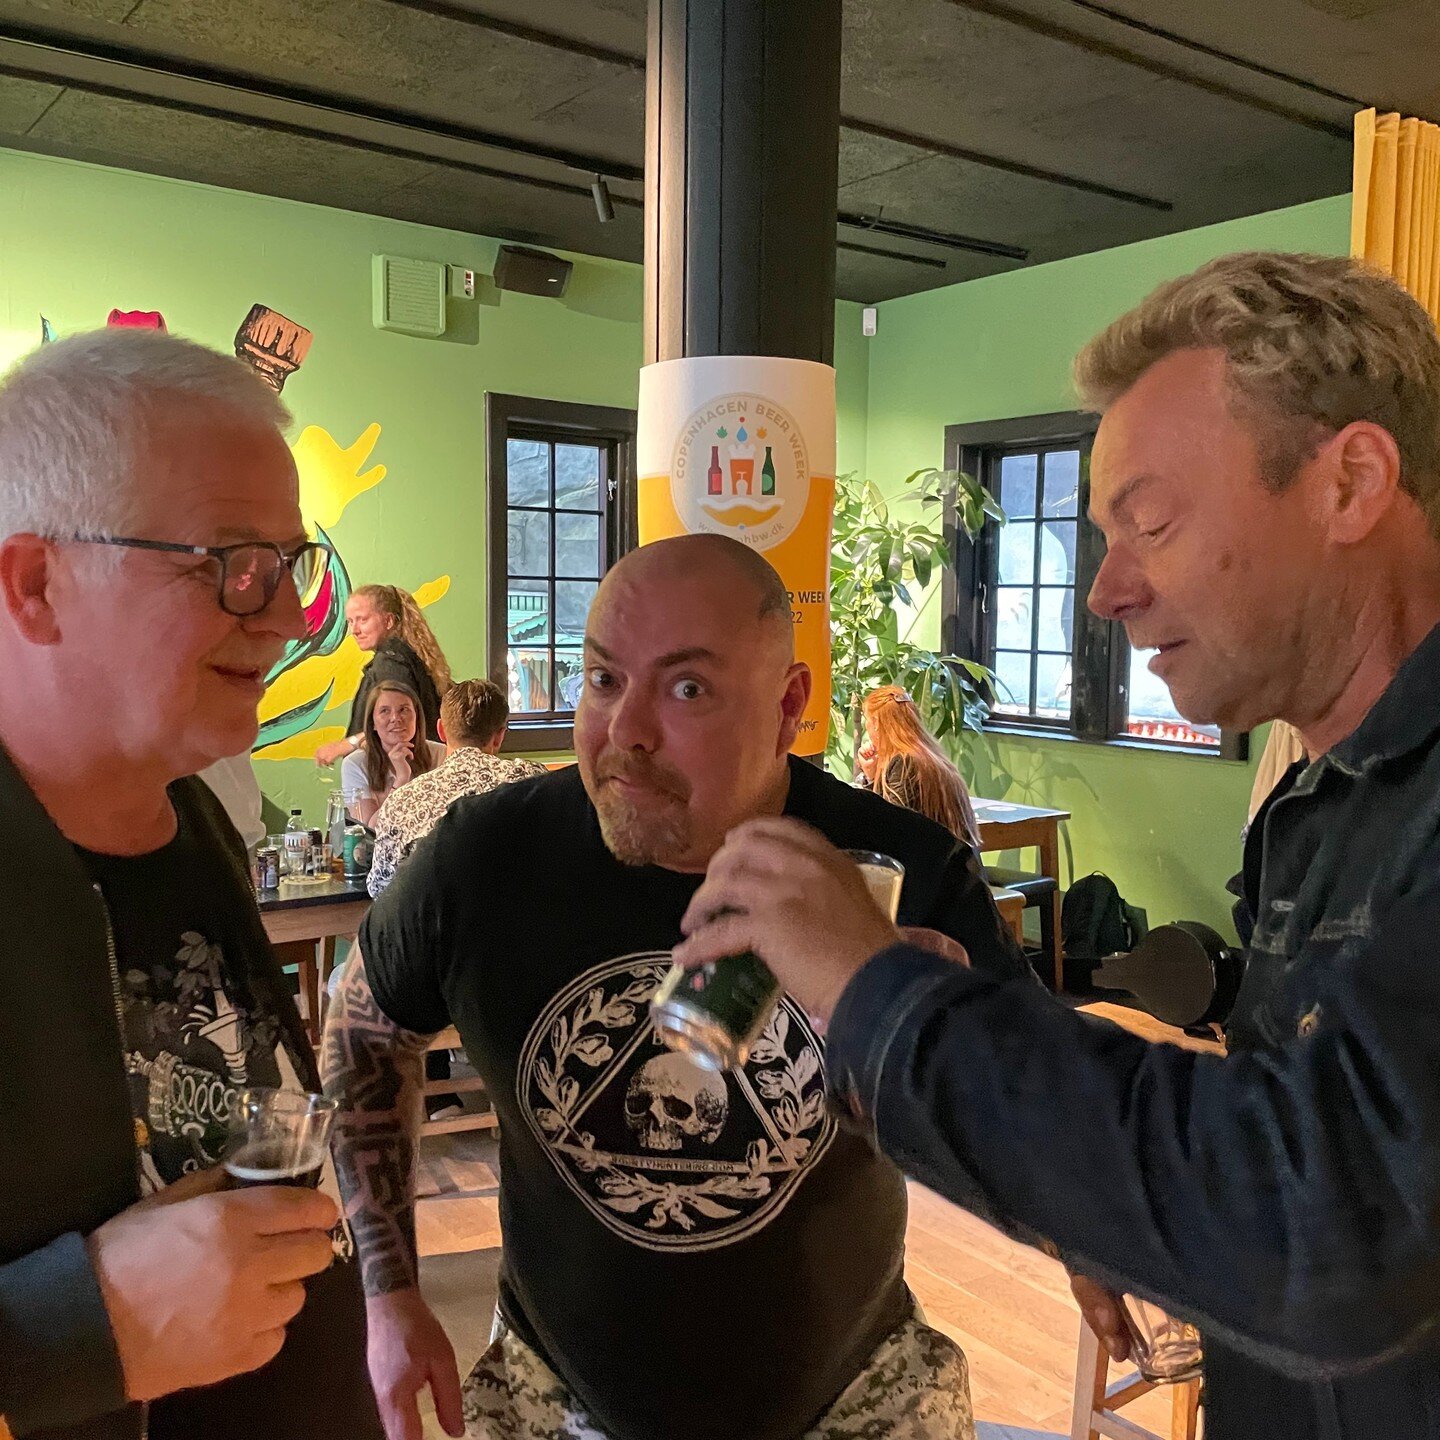 For Teedawn and other light birds, it is important to mingle with all beer people, even those who prefer more weight. If you feel the same way, visit Copenhagen Beer Week. #copenhagenbeerweek2022 #anarkistbartivoli #teedawn #mindfullrinking